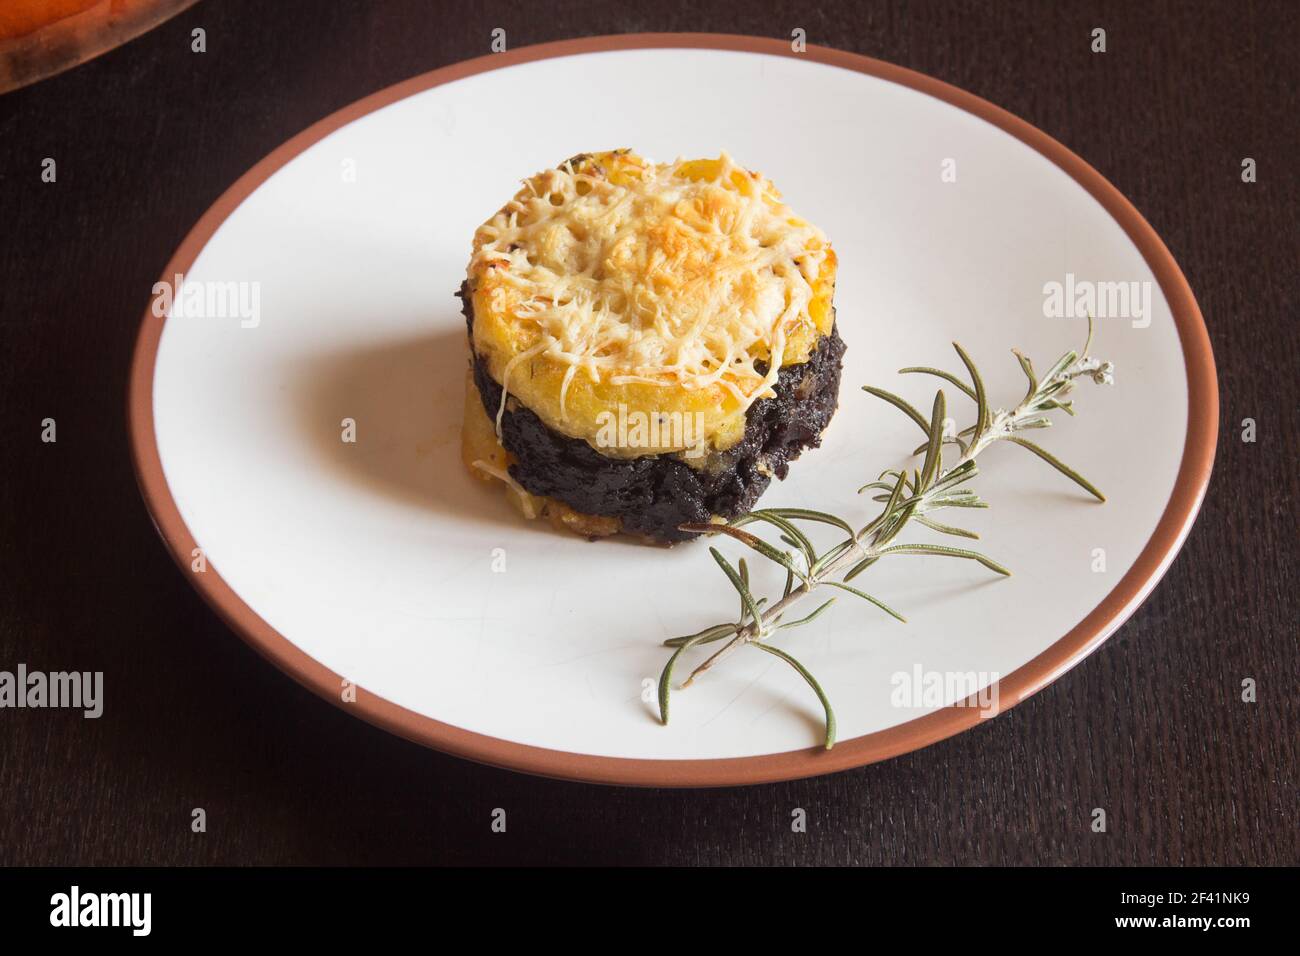 Presentation food plate of potato cake with black pudding cream, grated cheese, and a fresh branch of rosemary on a wooden table. Homemade recipes. Stock Photo